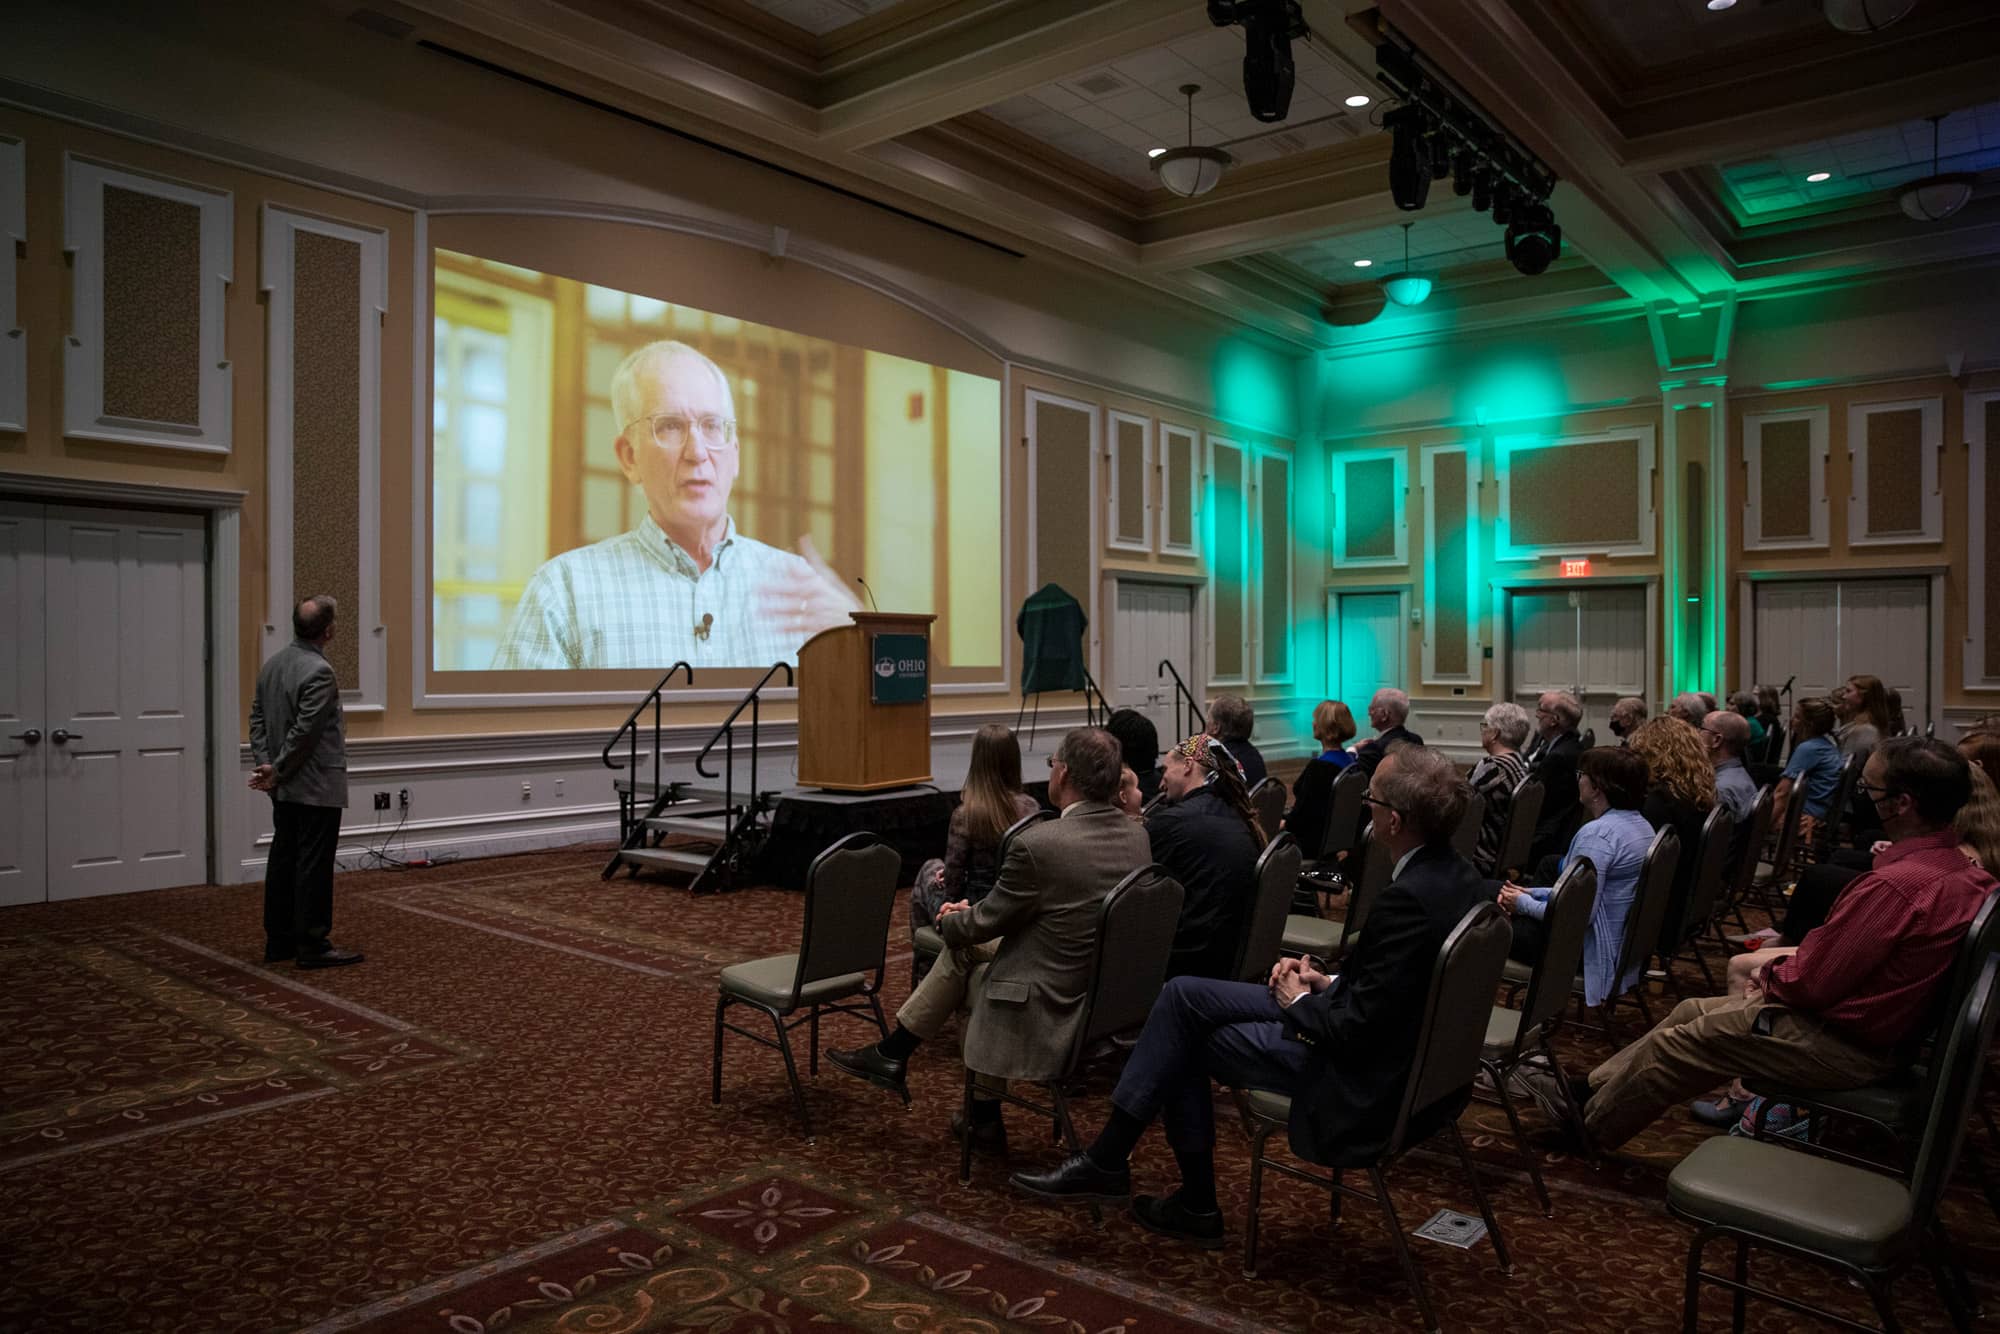 A video was shown of Distinguished Professor Steven Evans and his work as part of this special event.